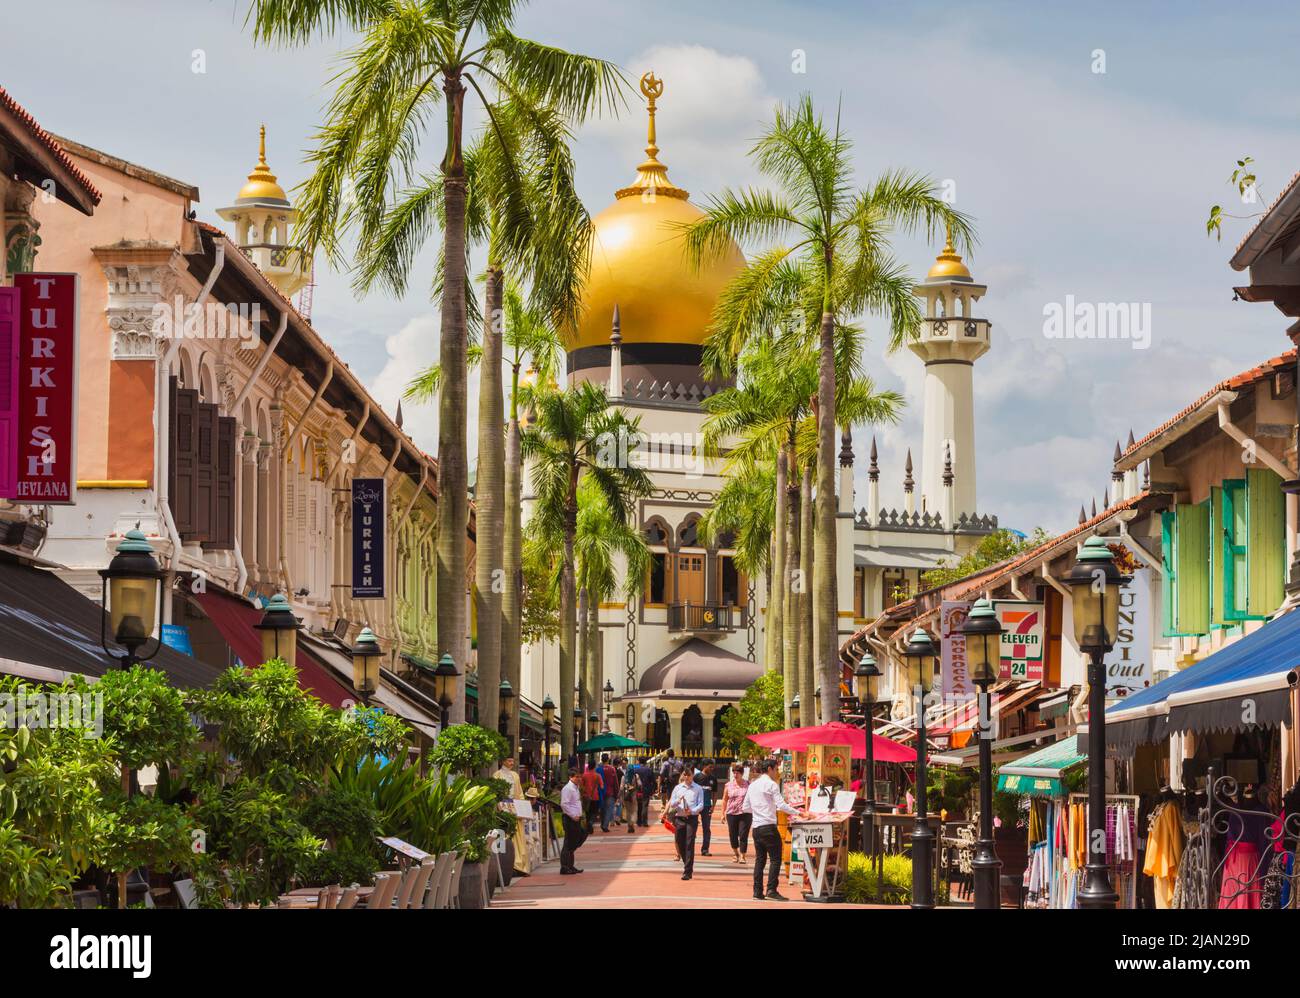 The Sultan Mosque, or Masjid Sultan, seen from Bussorah Street, Republic of Singapore.  Sultan Mosque is the largest in Singapore and a national monum Stock Photo